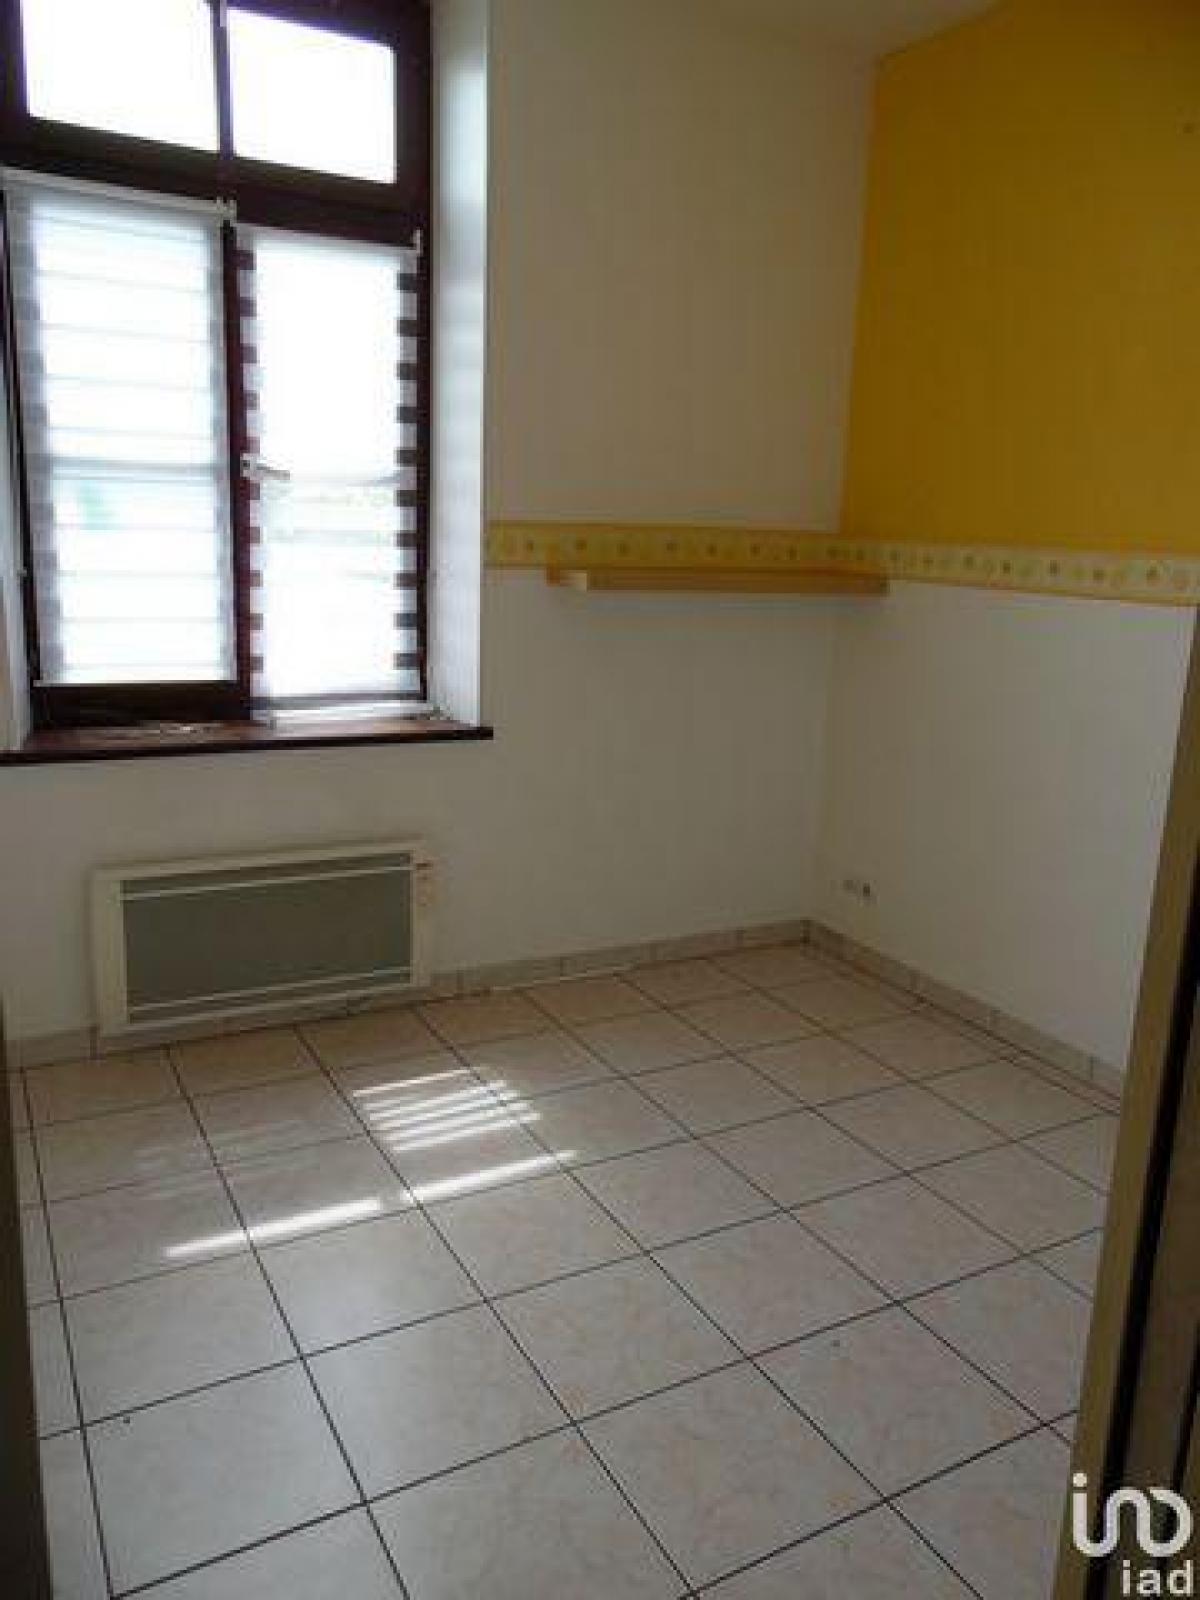 Picture of Condo For Sale in Metzervisse, Lorraine, France